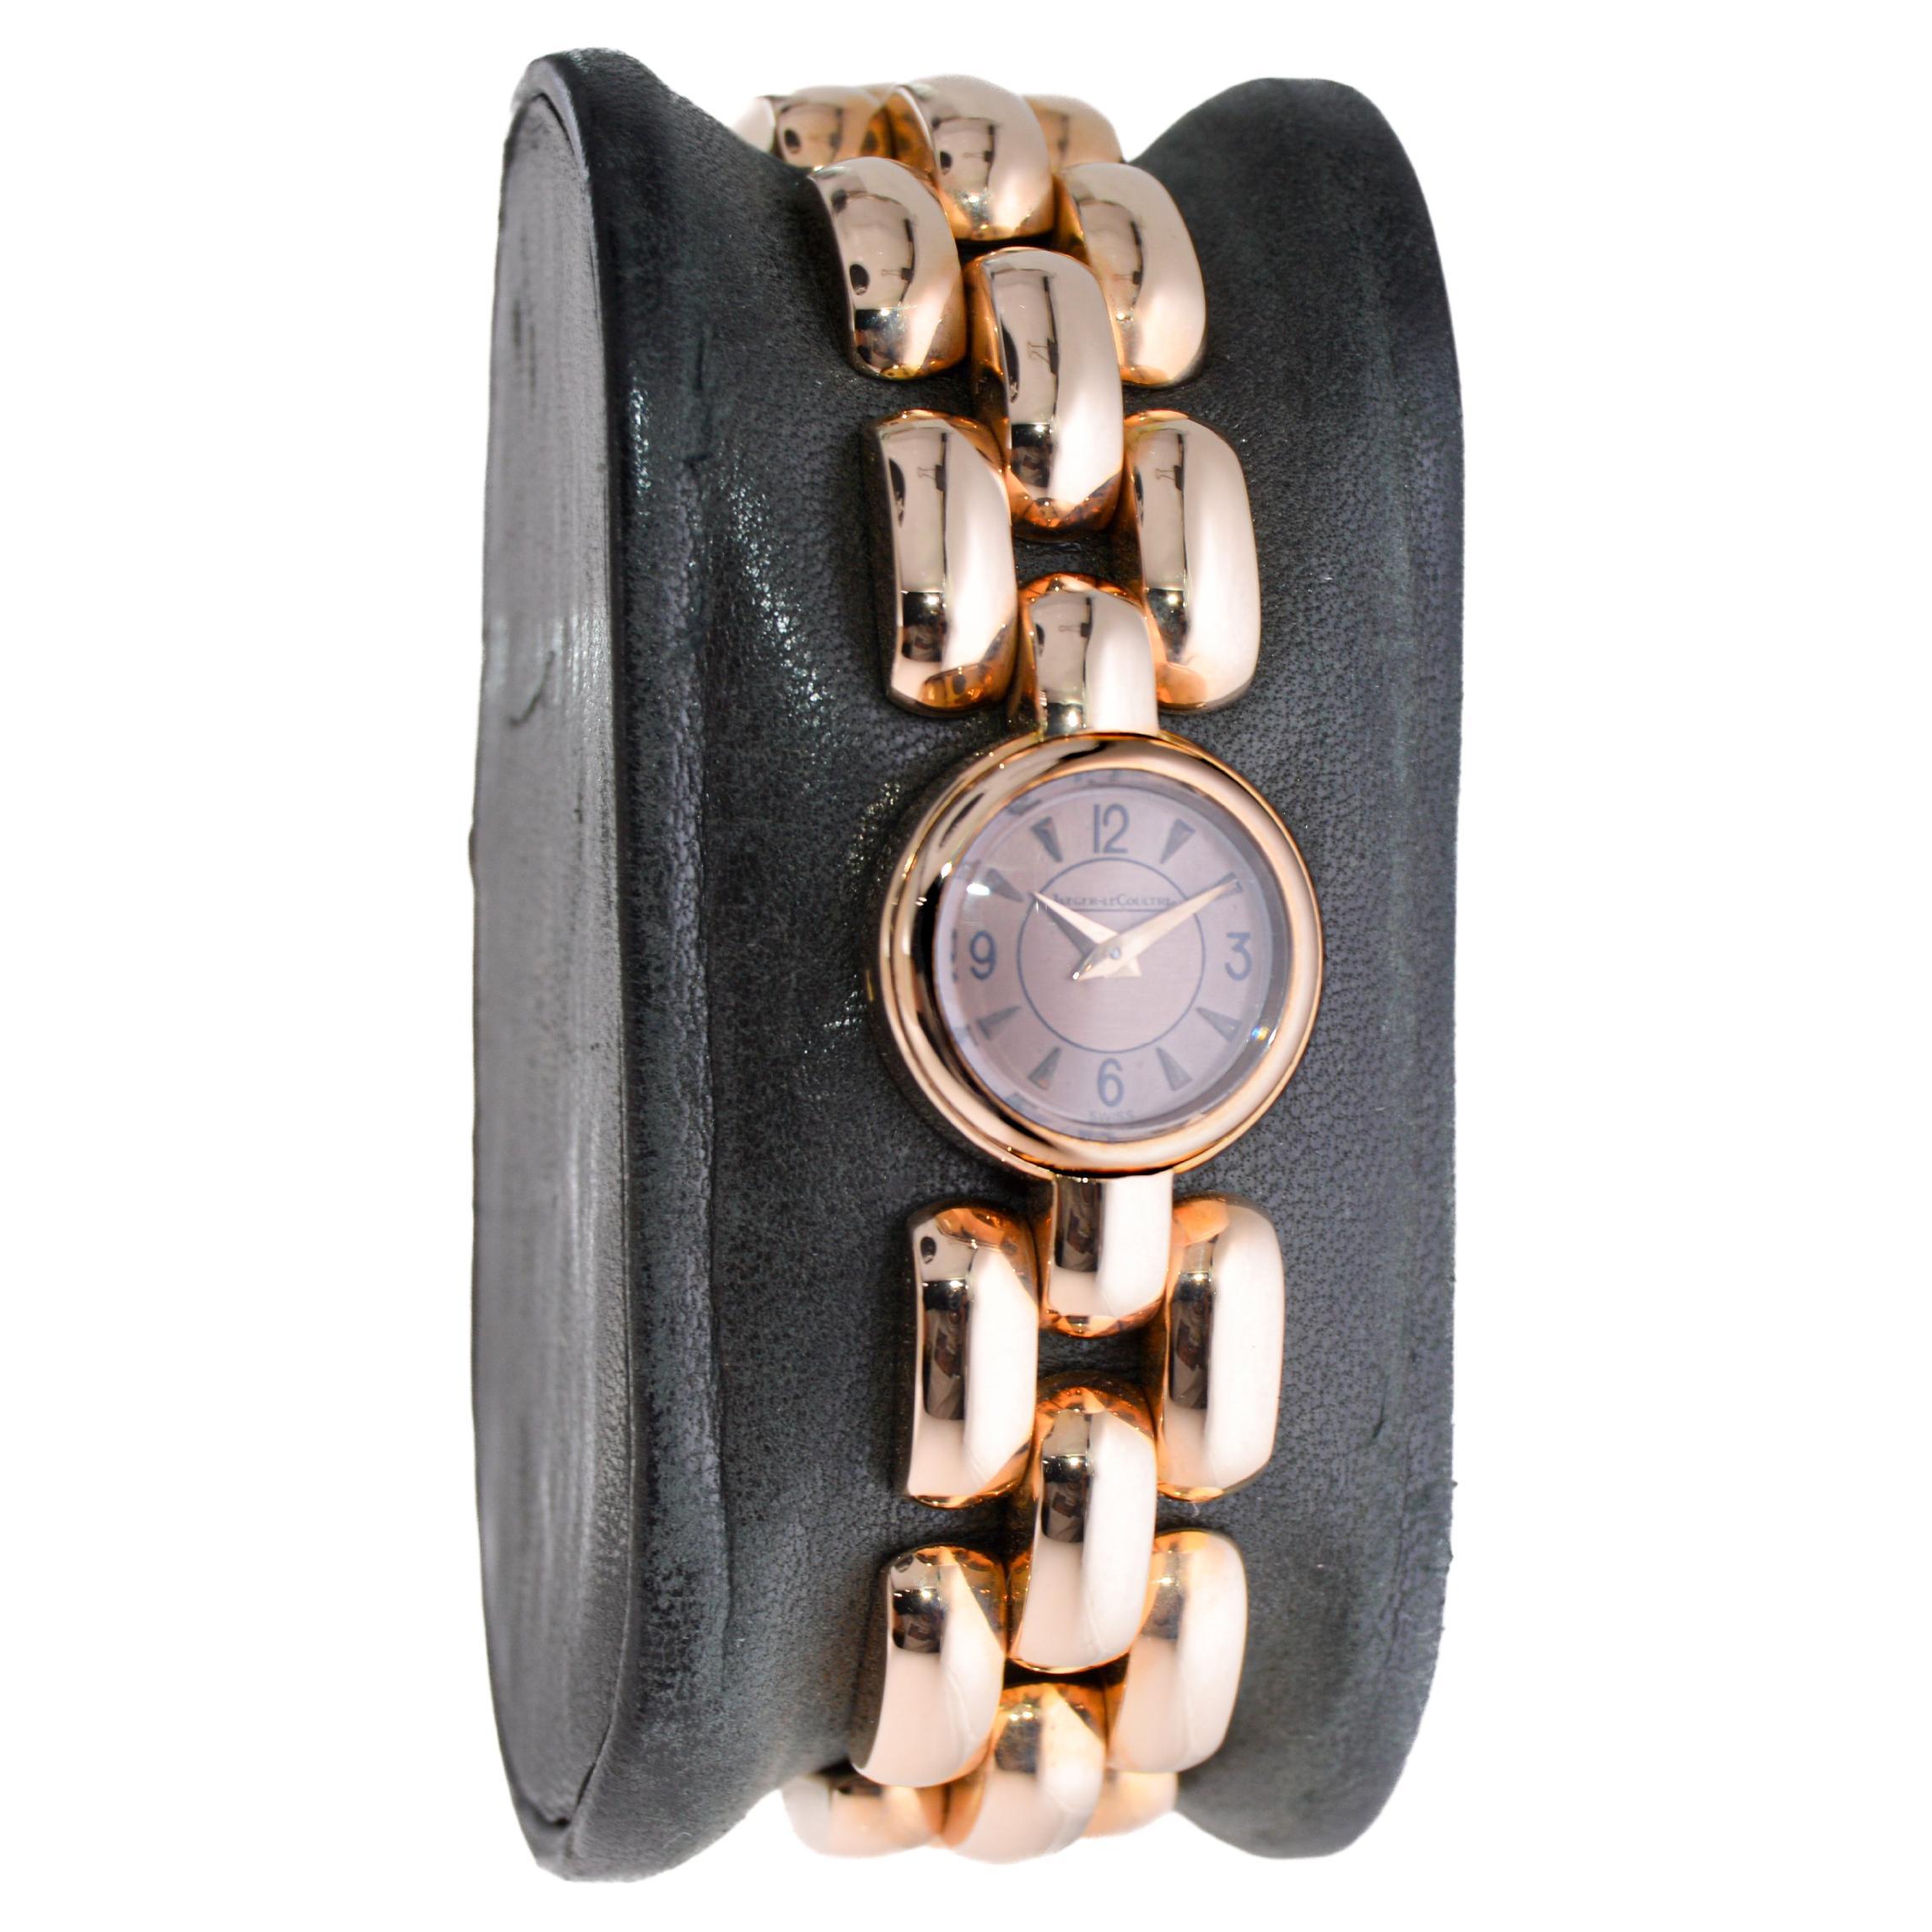 FACTORY / HOUSE: LeCoultre / Bracelet Dress Watch
STYLE / REFERENCE: Art Deco
METAL / MATERIAL: 18 Kt. Rose Gold
CIRCA: 1940's
DIMENSIONS: Length 16mm X Diameter 16mm
MOVEMENT / CALIBER: Manual Back Winding / 17 Jewels
DIAL / HANDS: Original / Rose